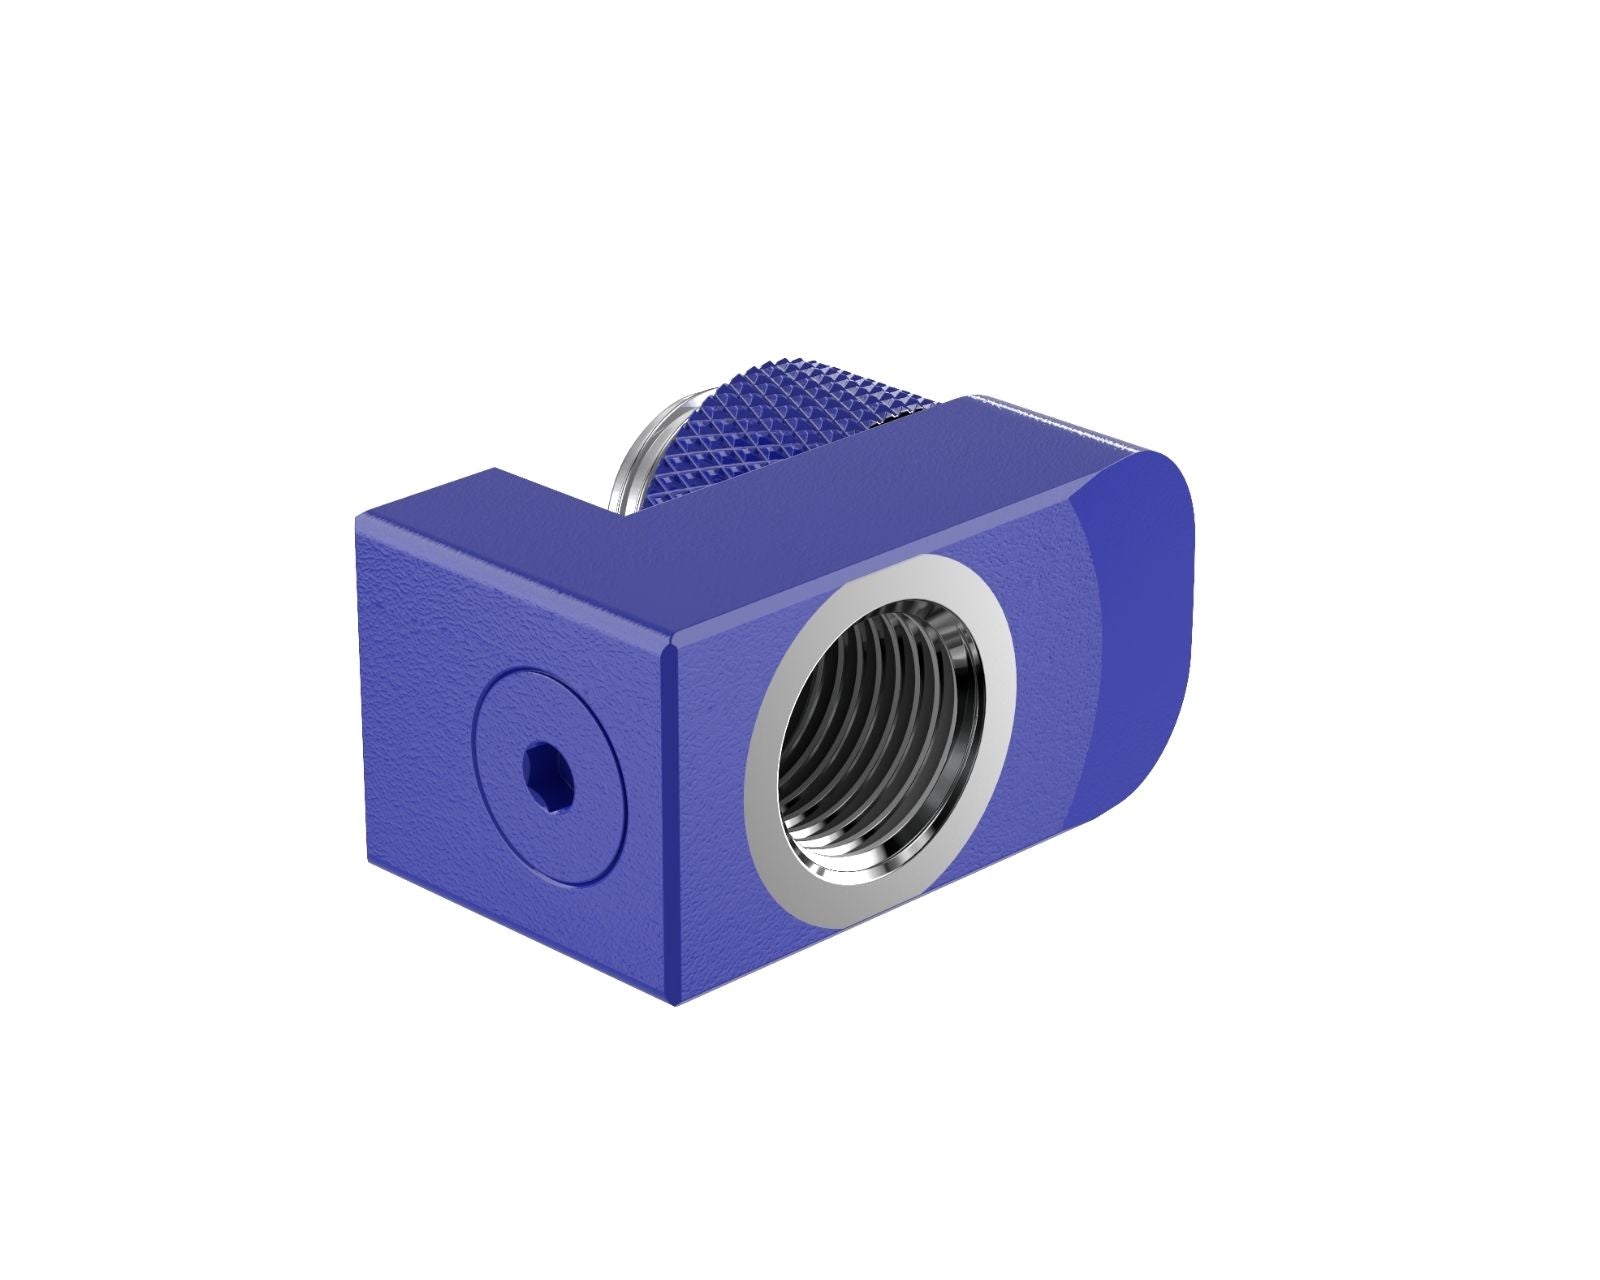 PrimoChill Male to Female G 1/4in. Supported Offset Rotary Fitting - True Blue